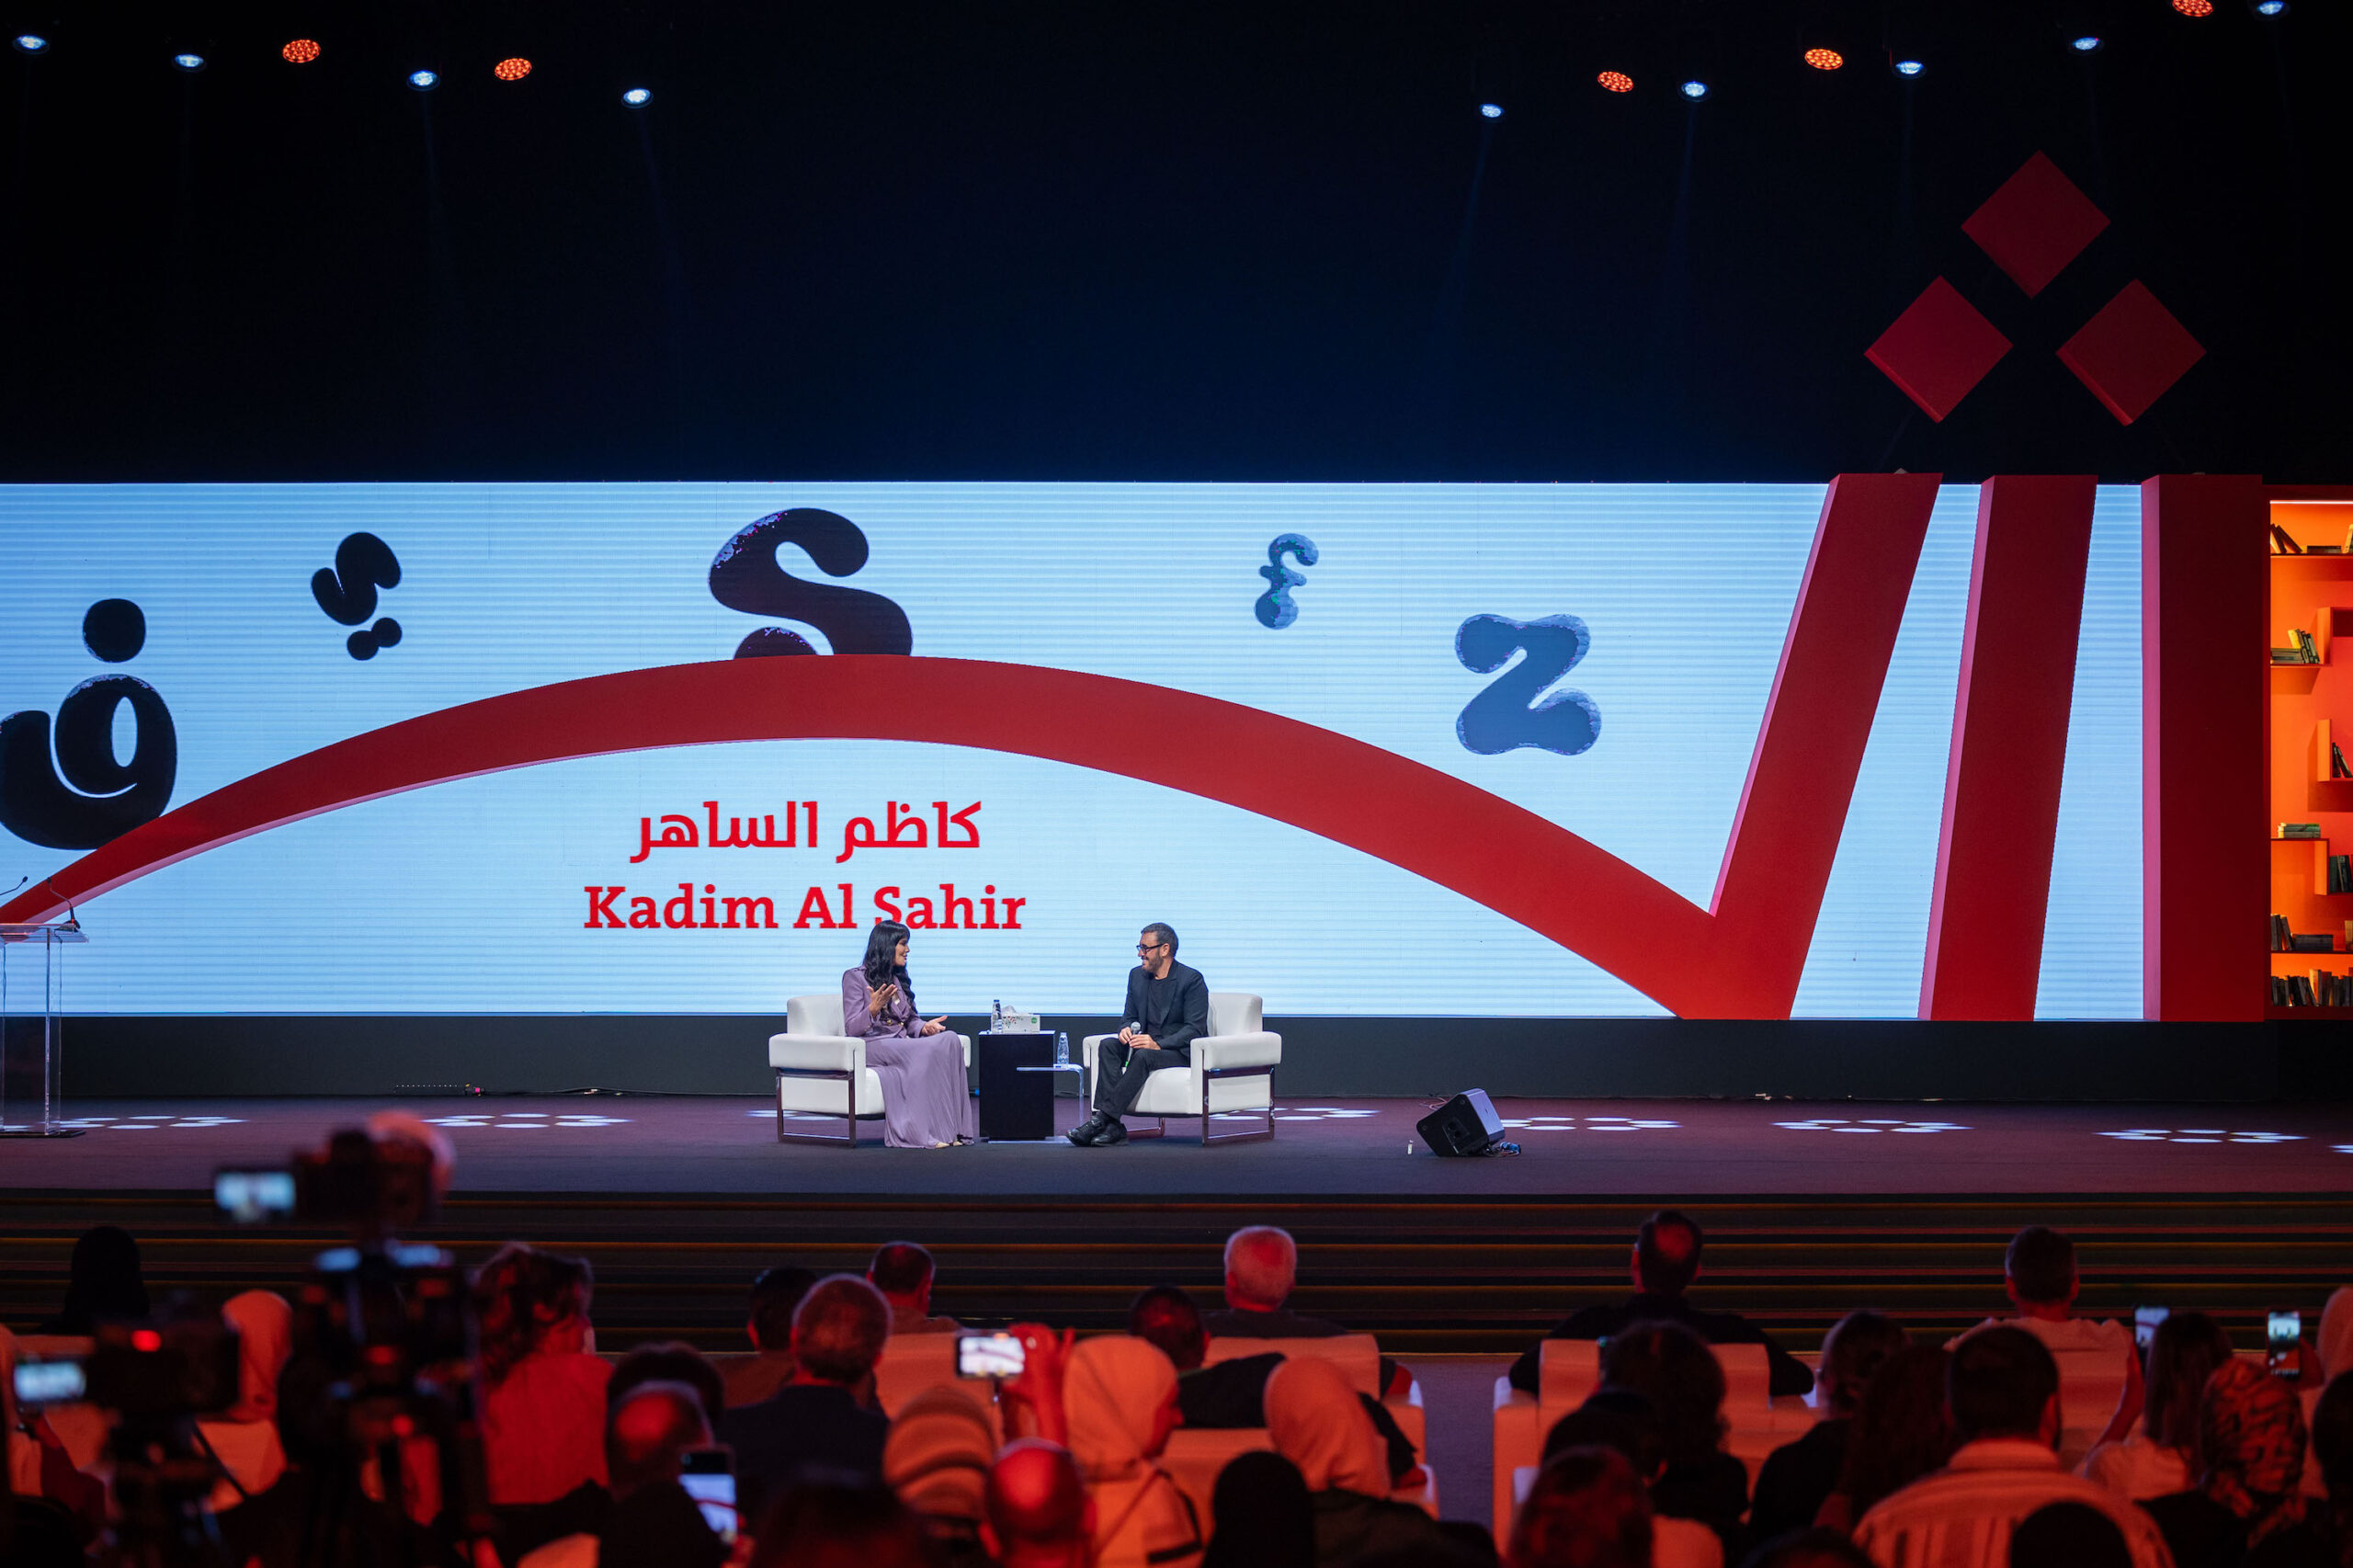 Caesar of Arabic music, Kadim Al Sahir reveals how reading expands horizons and respect for others at SIBF 2023